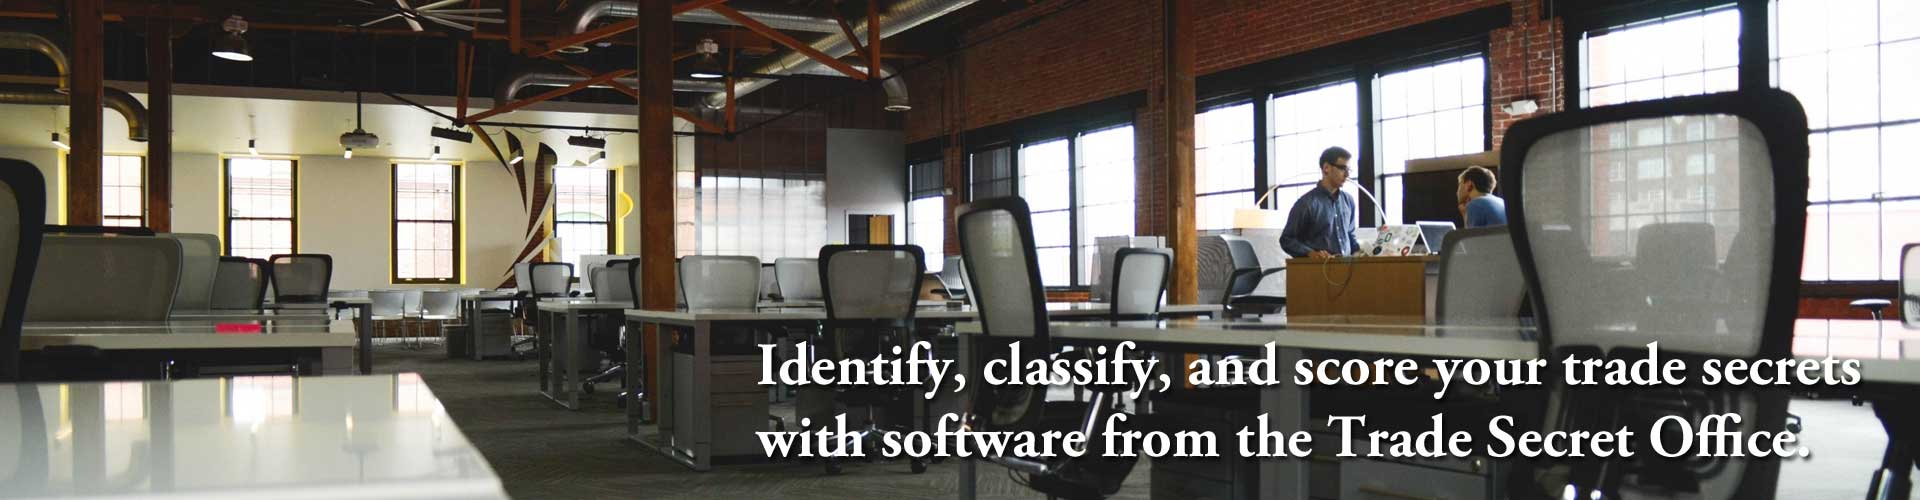 Identify, classify, and score your trade secrets with software from the Trade Secret Office.